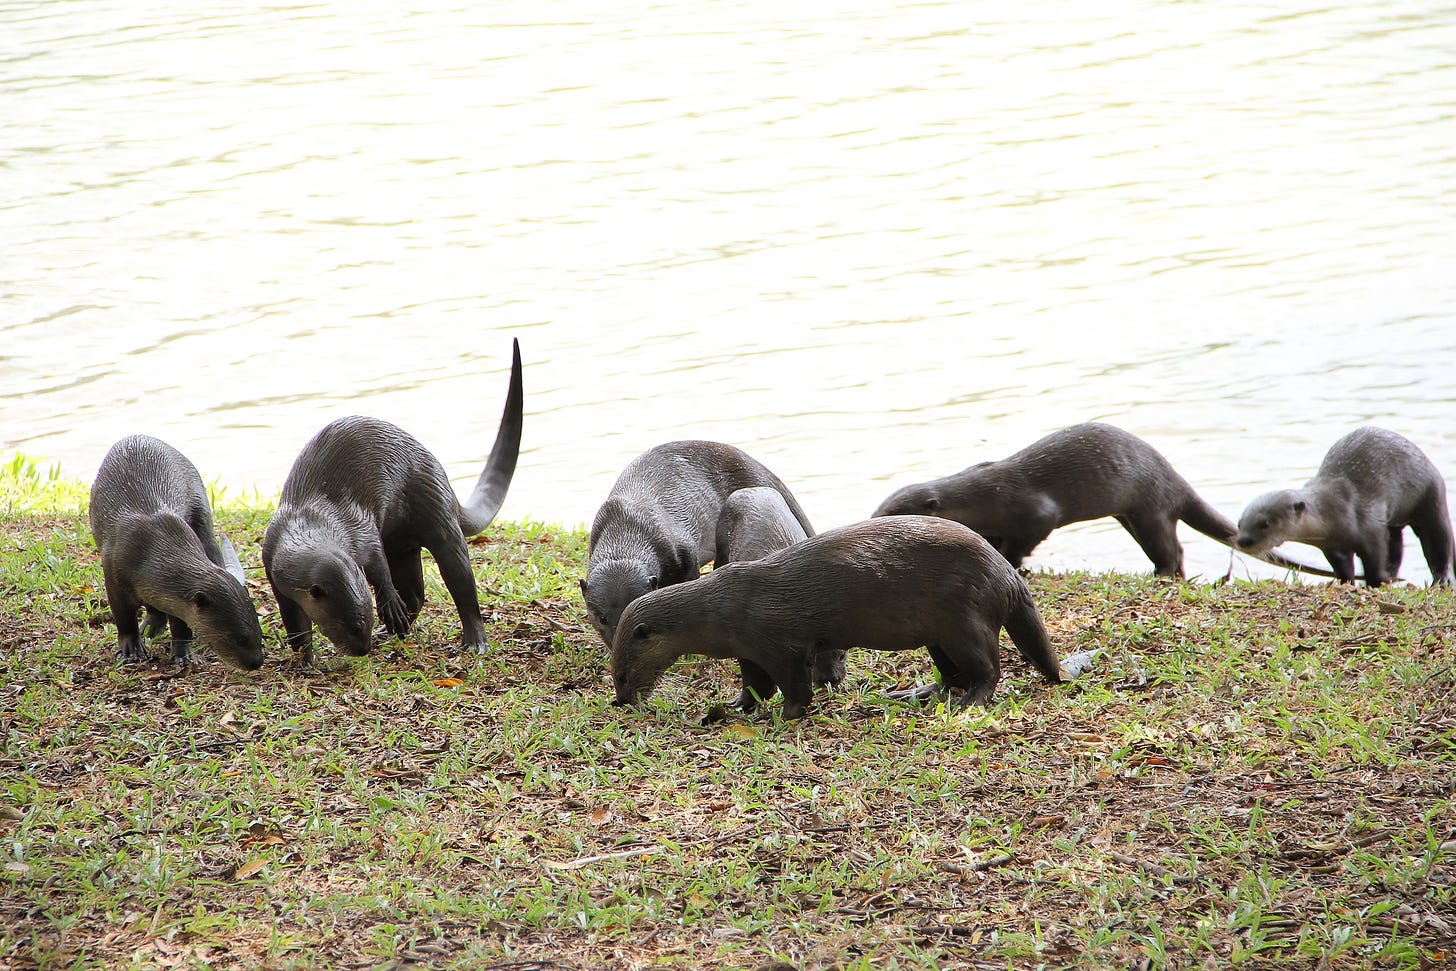 Otters coming on land in Jurong Lake Gardens, Singapore.